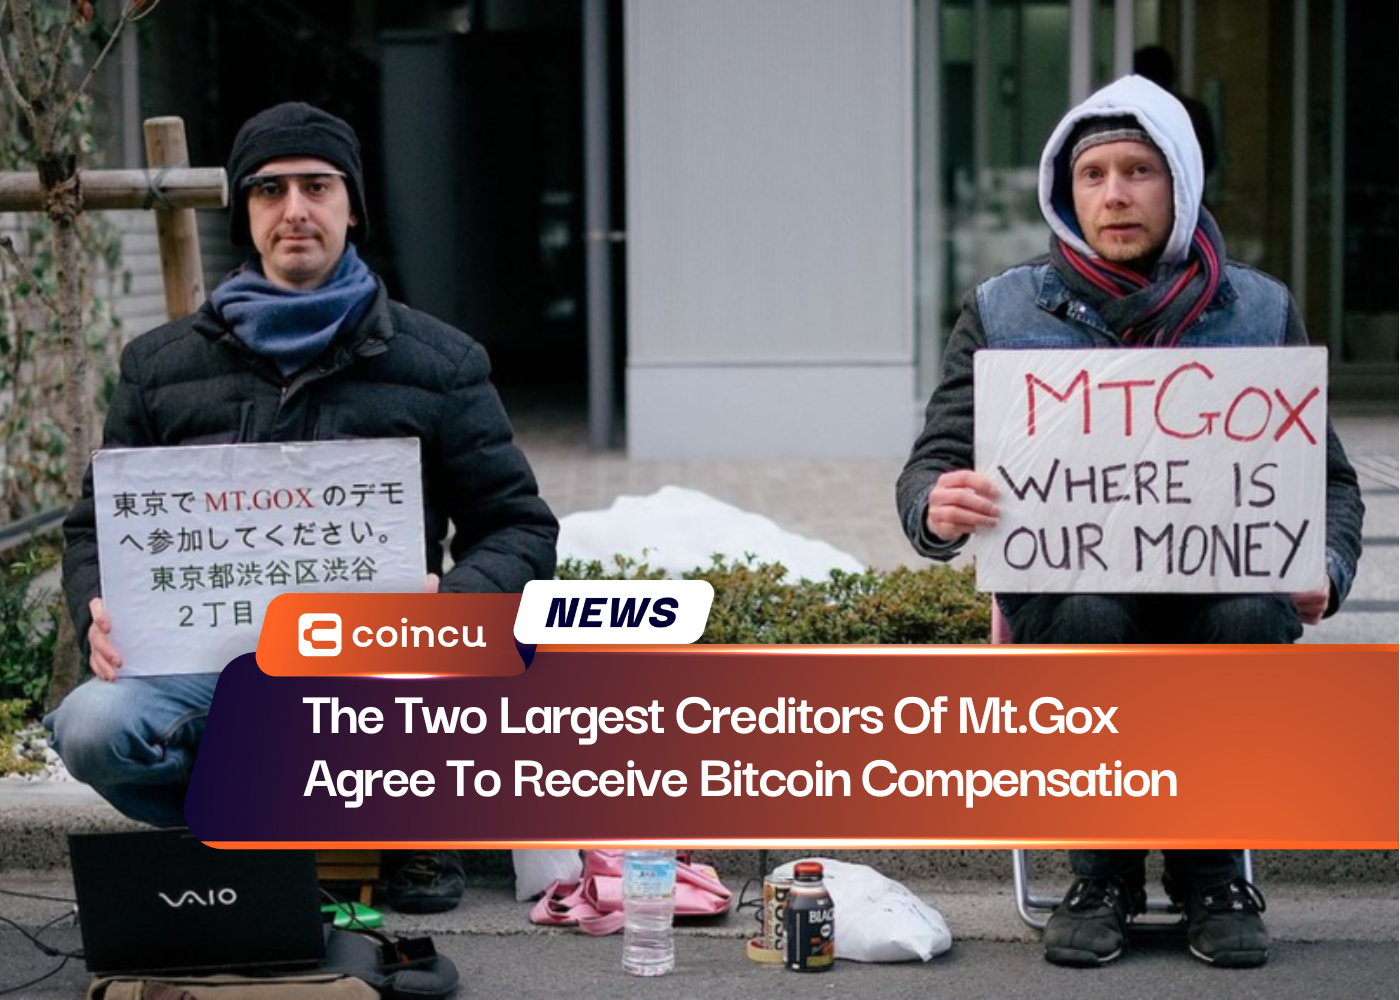 The Two Largest Creditors Of Mt.Gox Agree To Receive Bitcoin Compensation